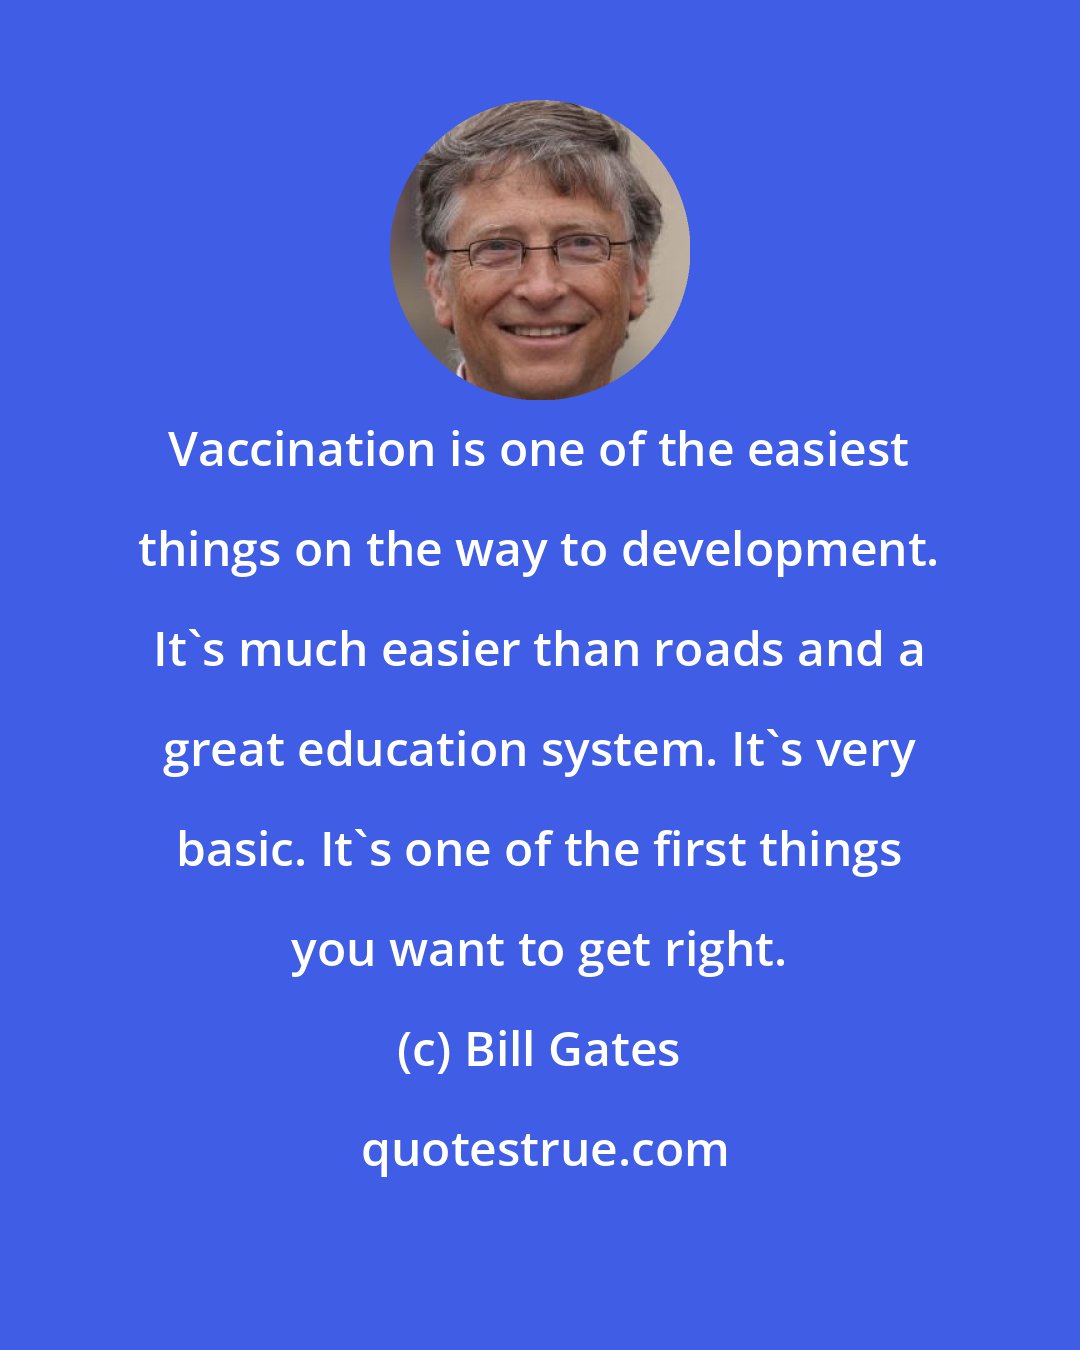 Bill Gates: Vaccination is one of the easiest things on the way to development. It's much easier than roads and a great education system. It's very basic. It's one of the first things you want to get right.